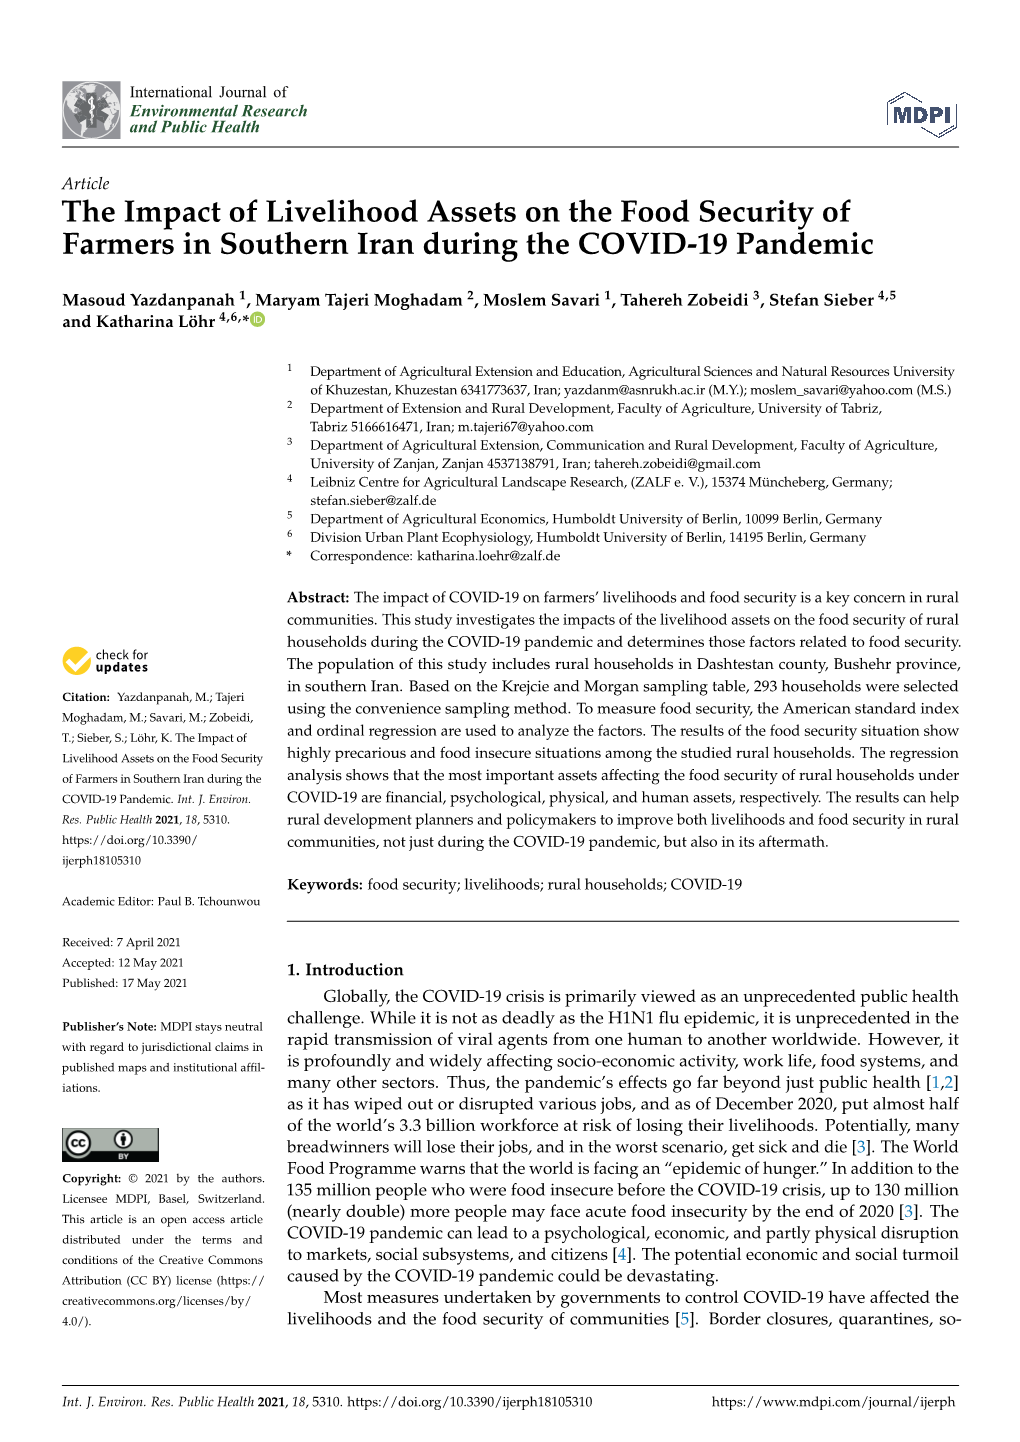 The Impact of Livelihood Assets on the Food Security of Farmers in Southern Iran During the COVID-19 Pandemic